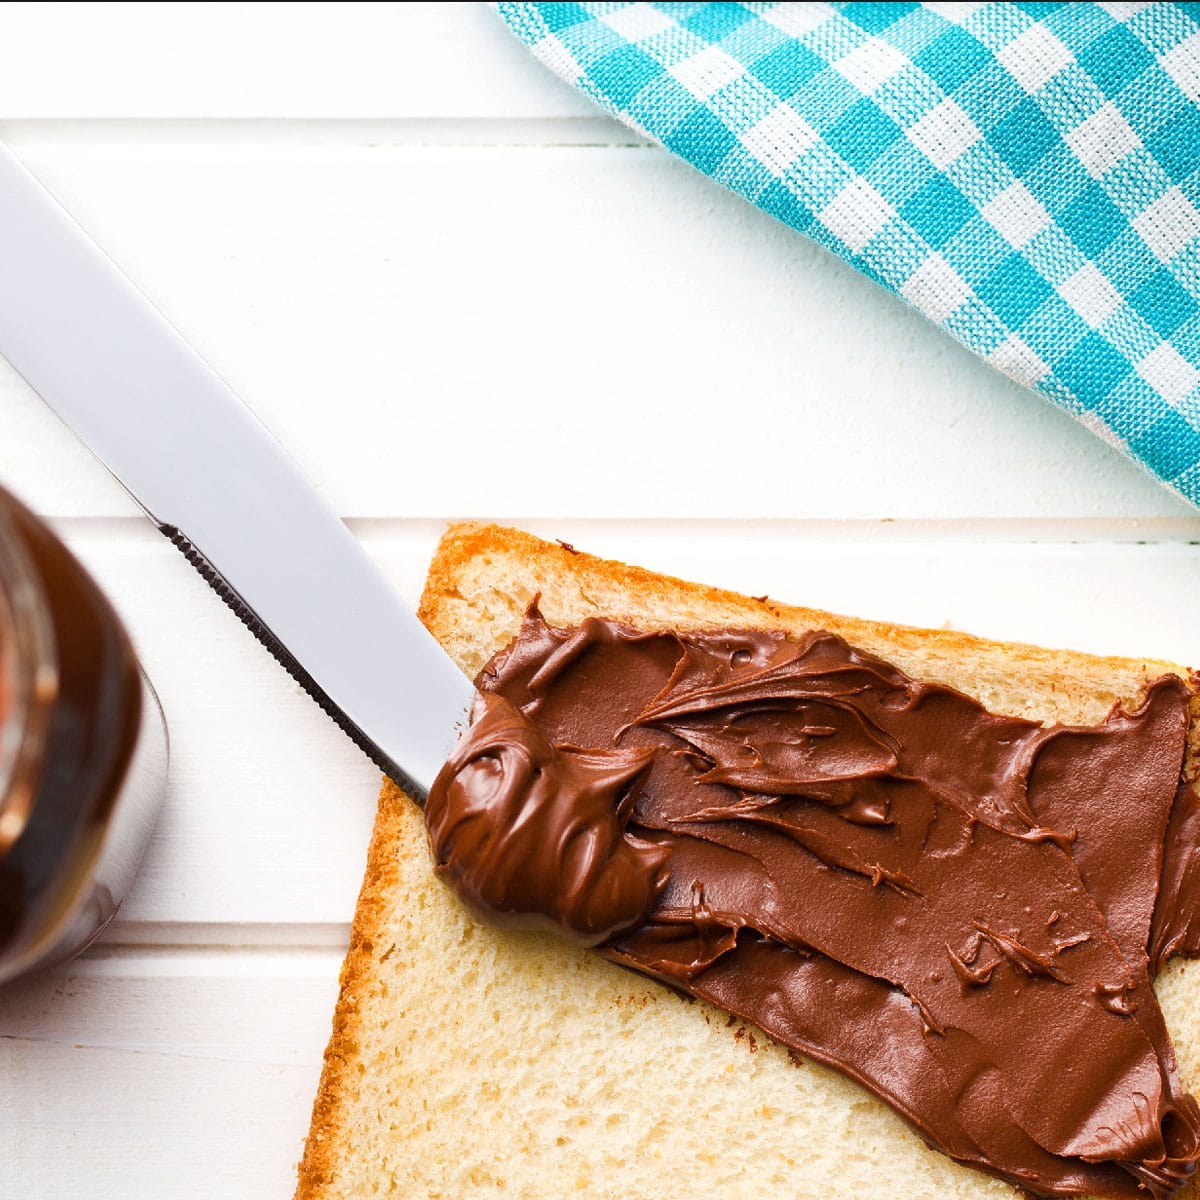 So while you don't need to refrigerate Nutella, keeping it in a cool, dark place like your pantry is best. Refrigerating Nutella can cause it to harden and change in texture.